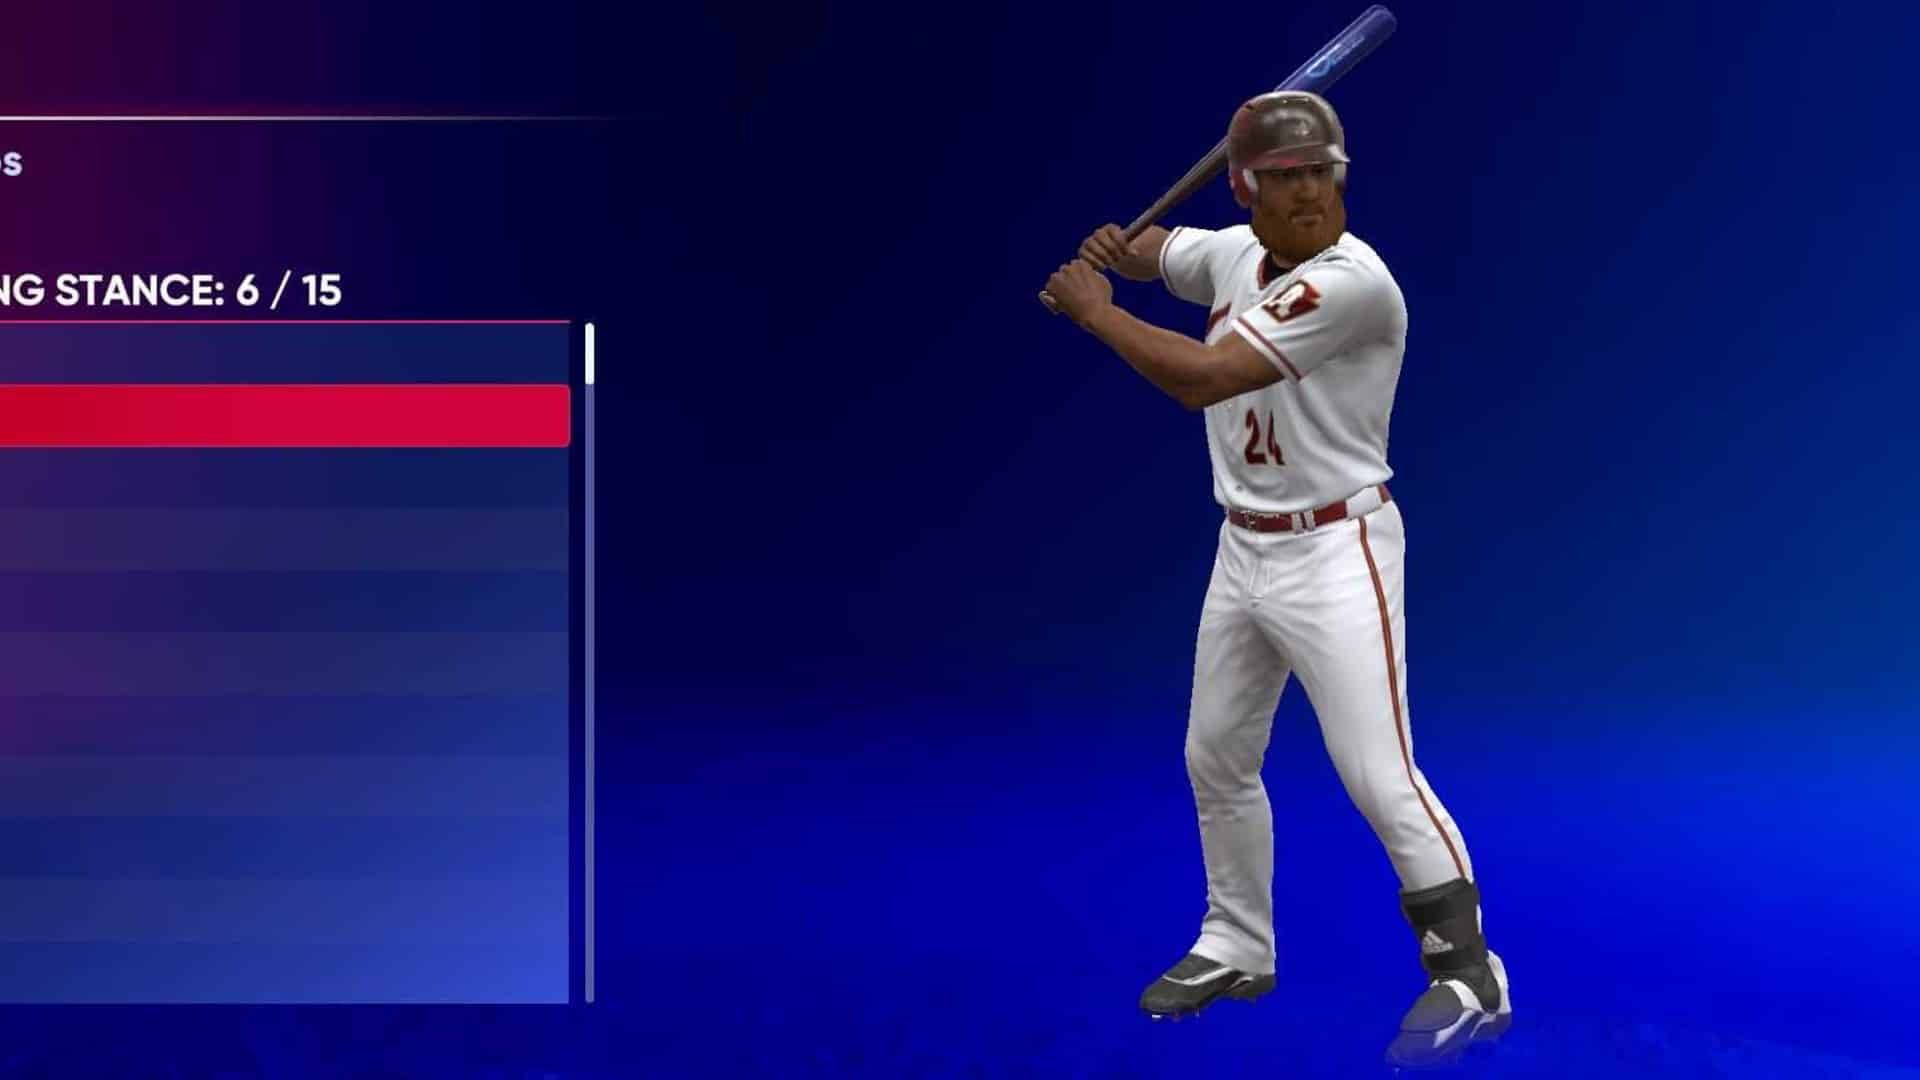 MLB The Show 21: Best Batting Stances (Current Players) - Outsider